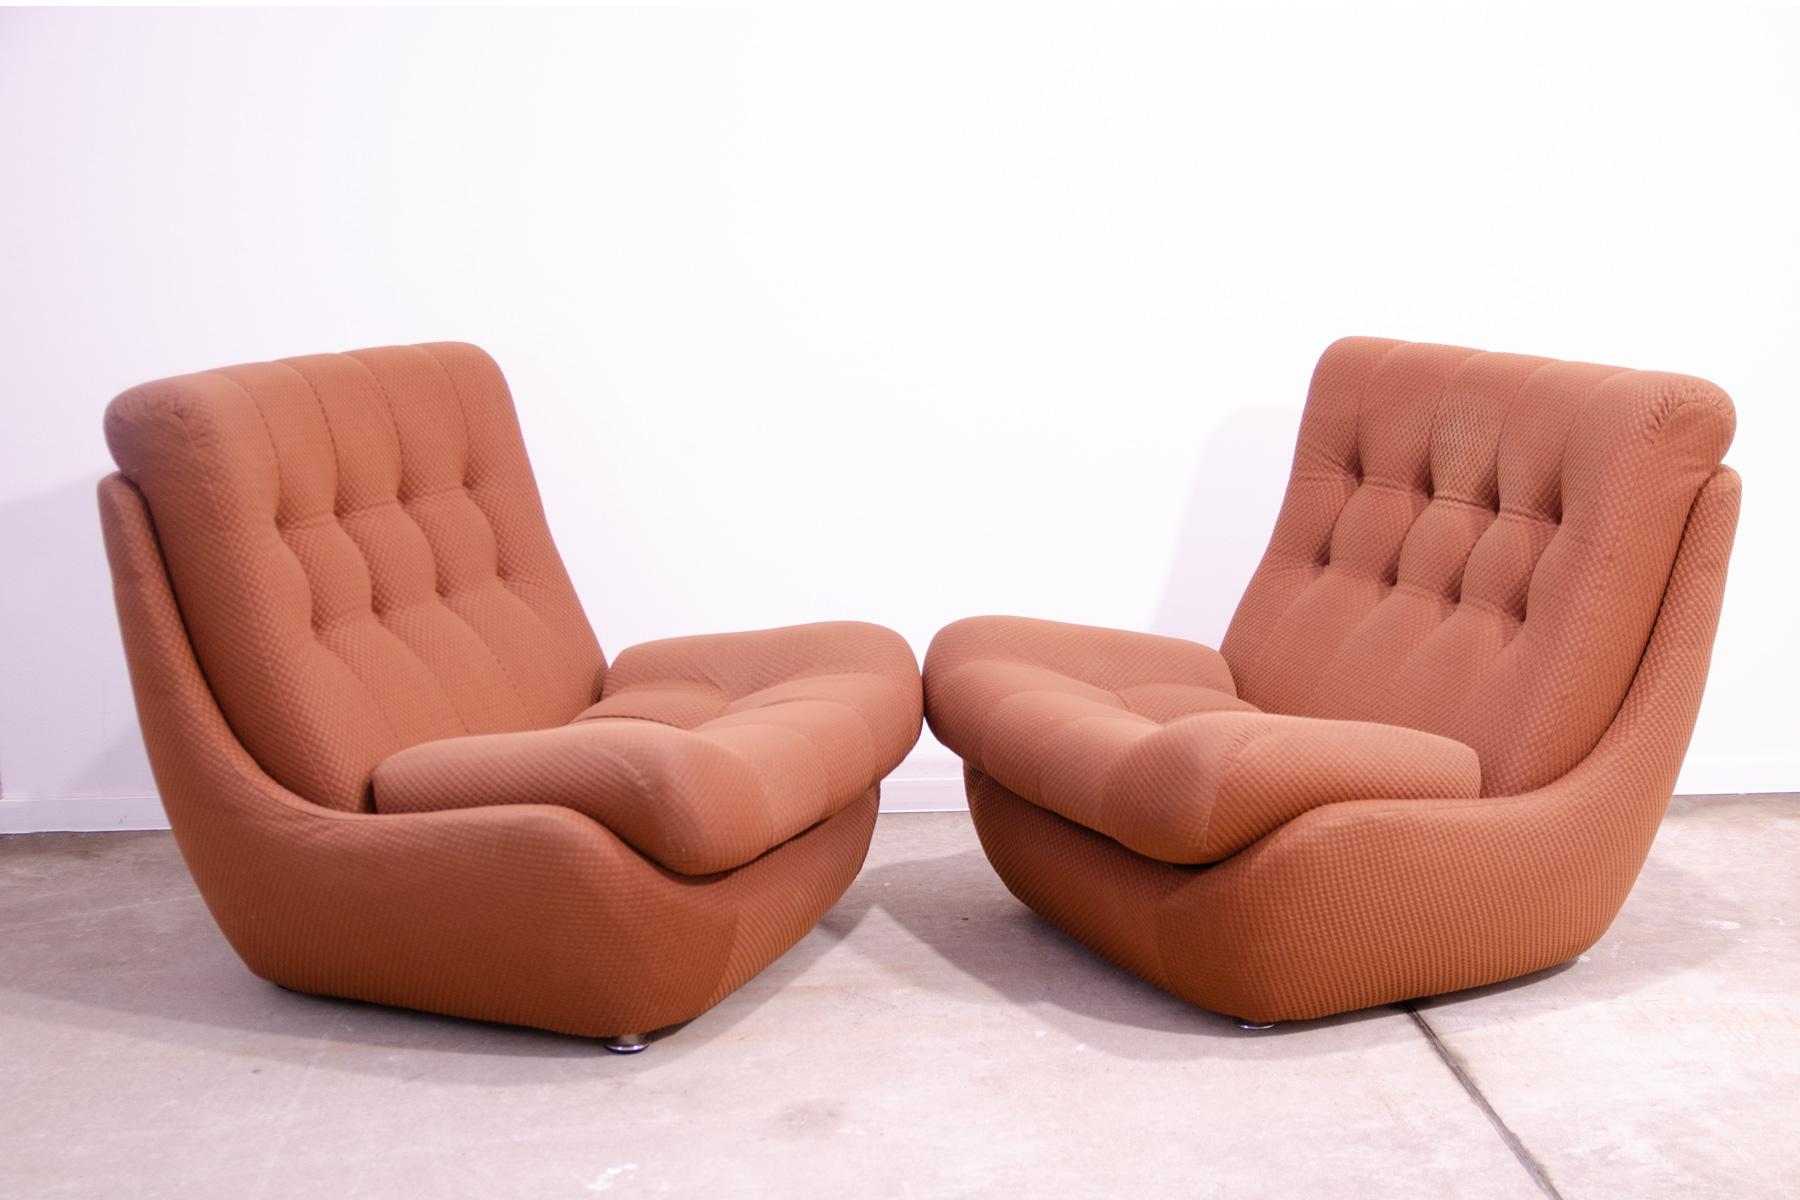 These vintage armchairs was a part of a living room set made by JITONA company in the 1970´s.
They represent a typical example of furniture design of the 1970/1980s years of the 20th Century ´s in the former Czechoslovakia.
The furniture is very